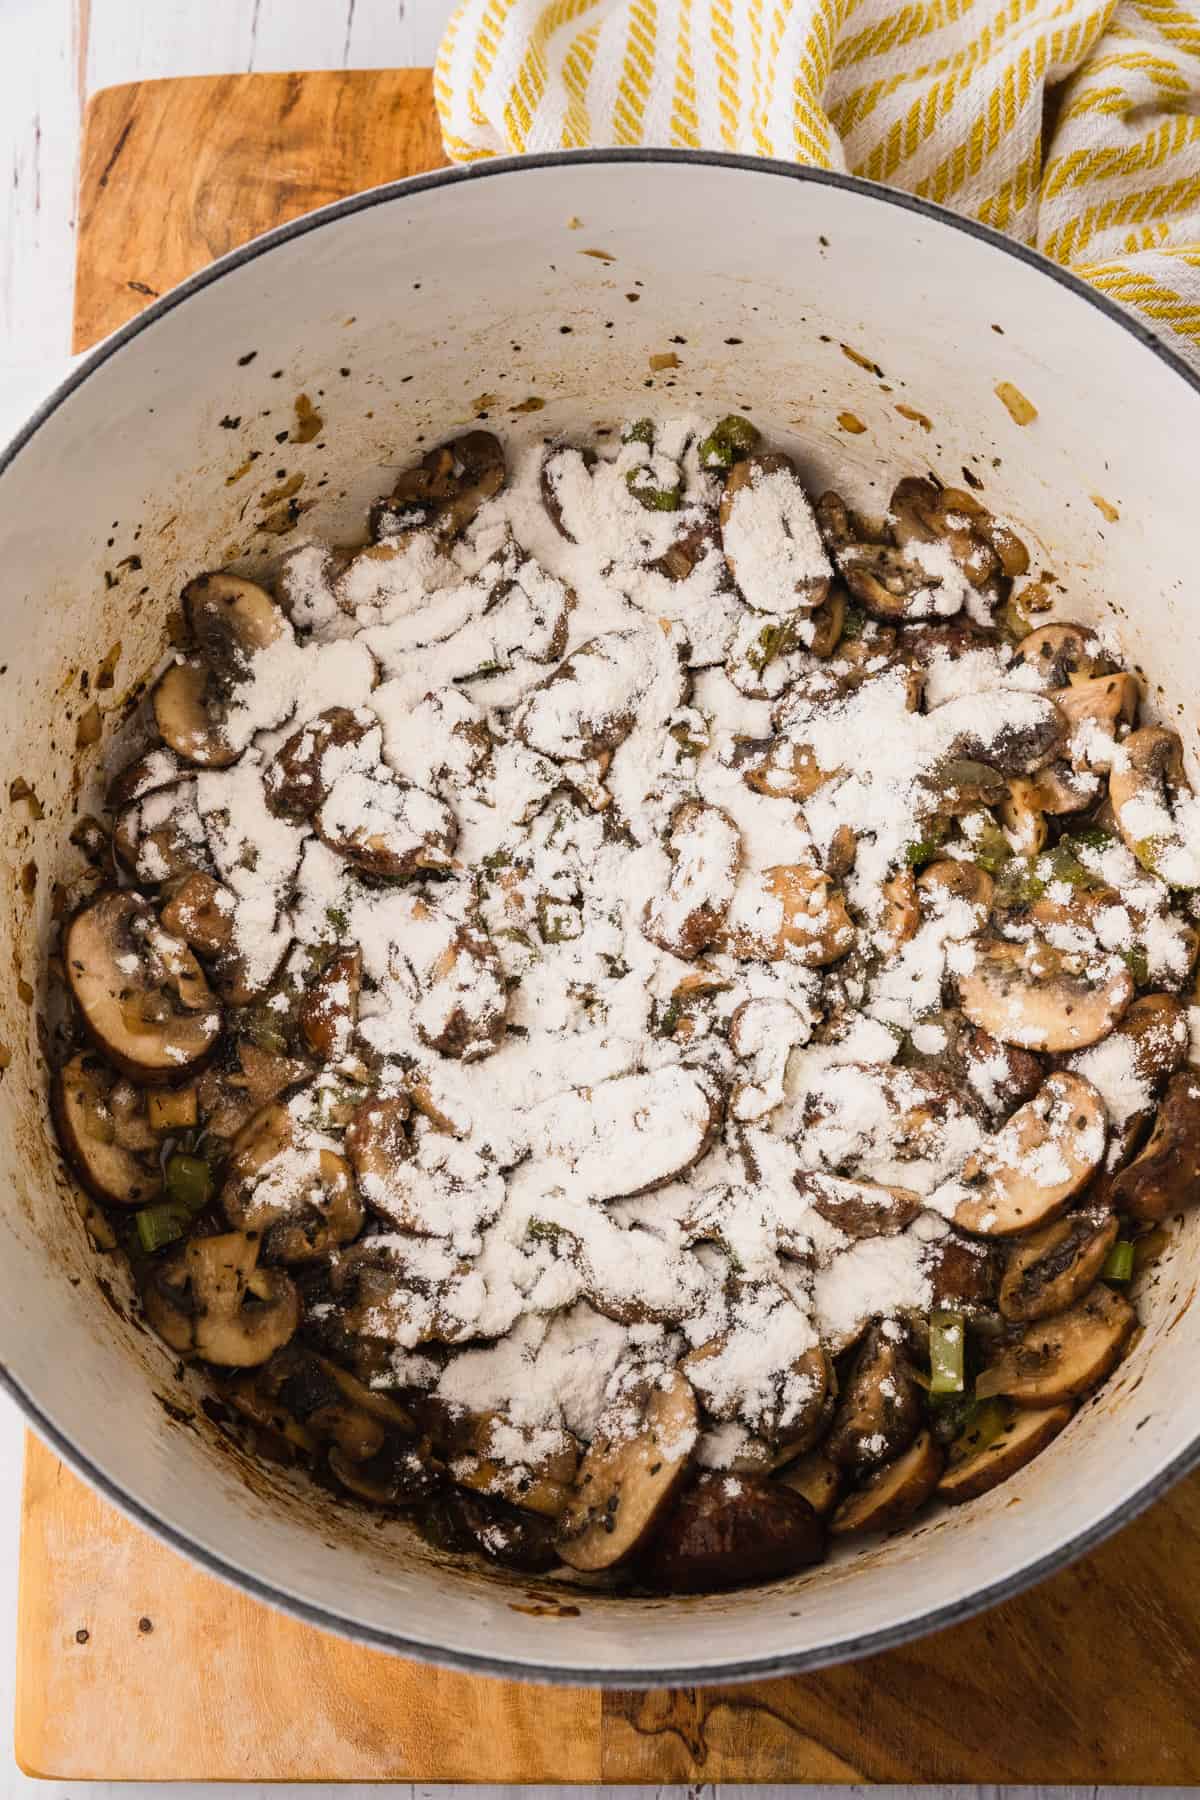 flour sprinkled over cooked mushrooms